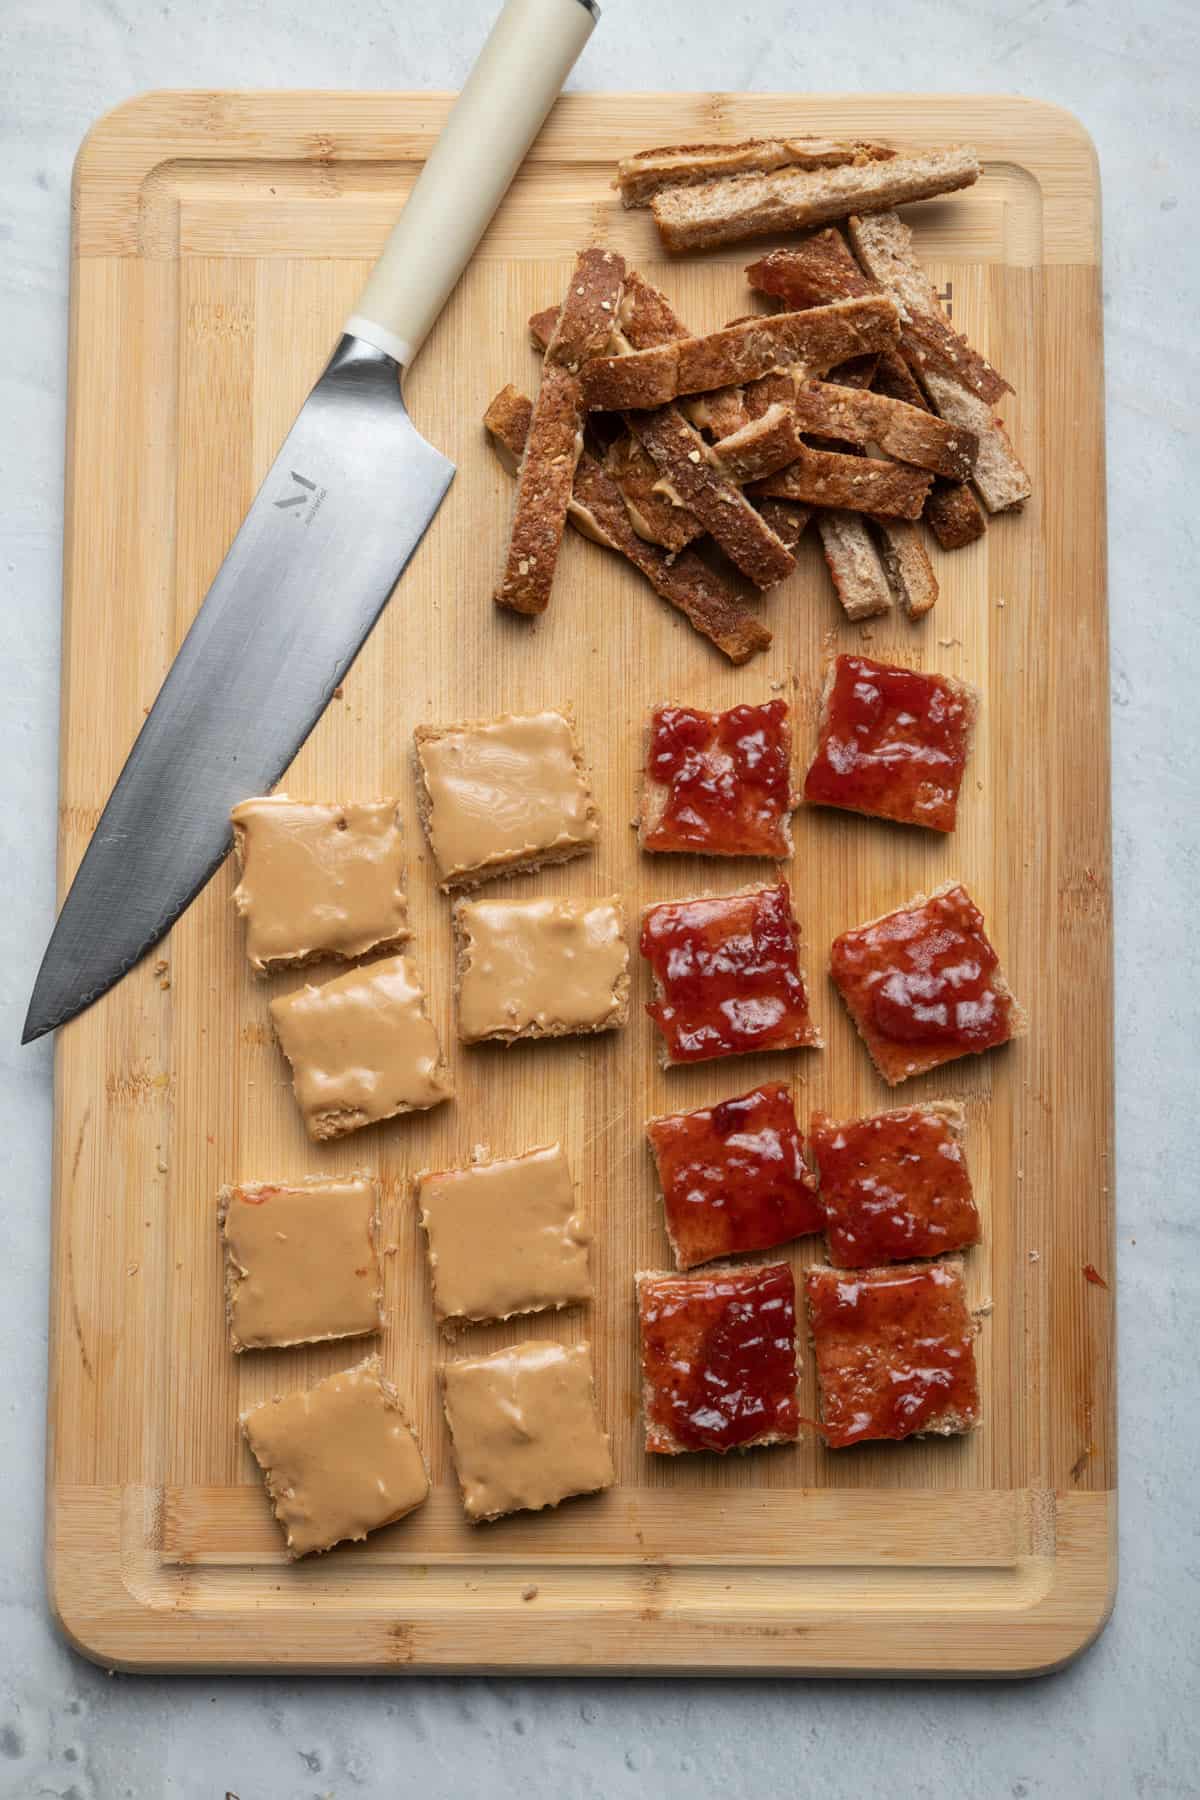 Cutting board showing the peanut butter slice and jelly slice cut into 8 pieces